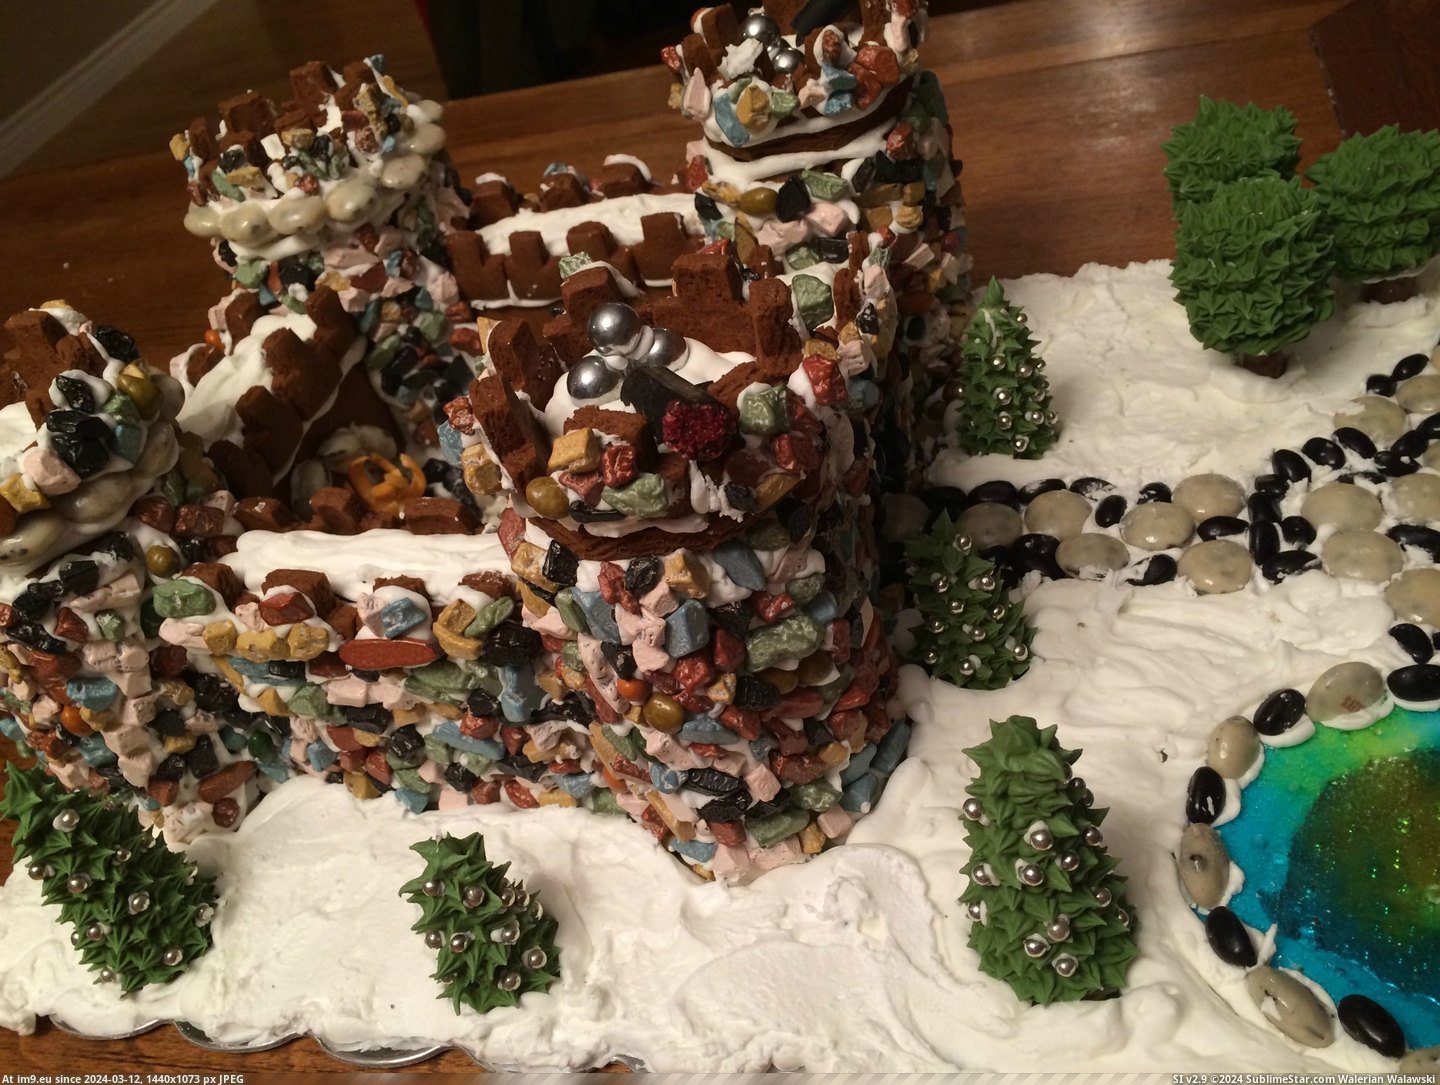 #Husband #Get #Our #Divorced #Collaborated #Project #Gingerbread #Success [Pics] My husband and I collaborated on our first gingerbread project and didn't get divorced...success! 9 Pic. (Image of album My r/PICS favs))